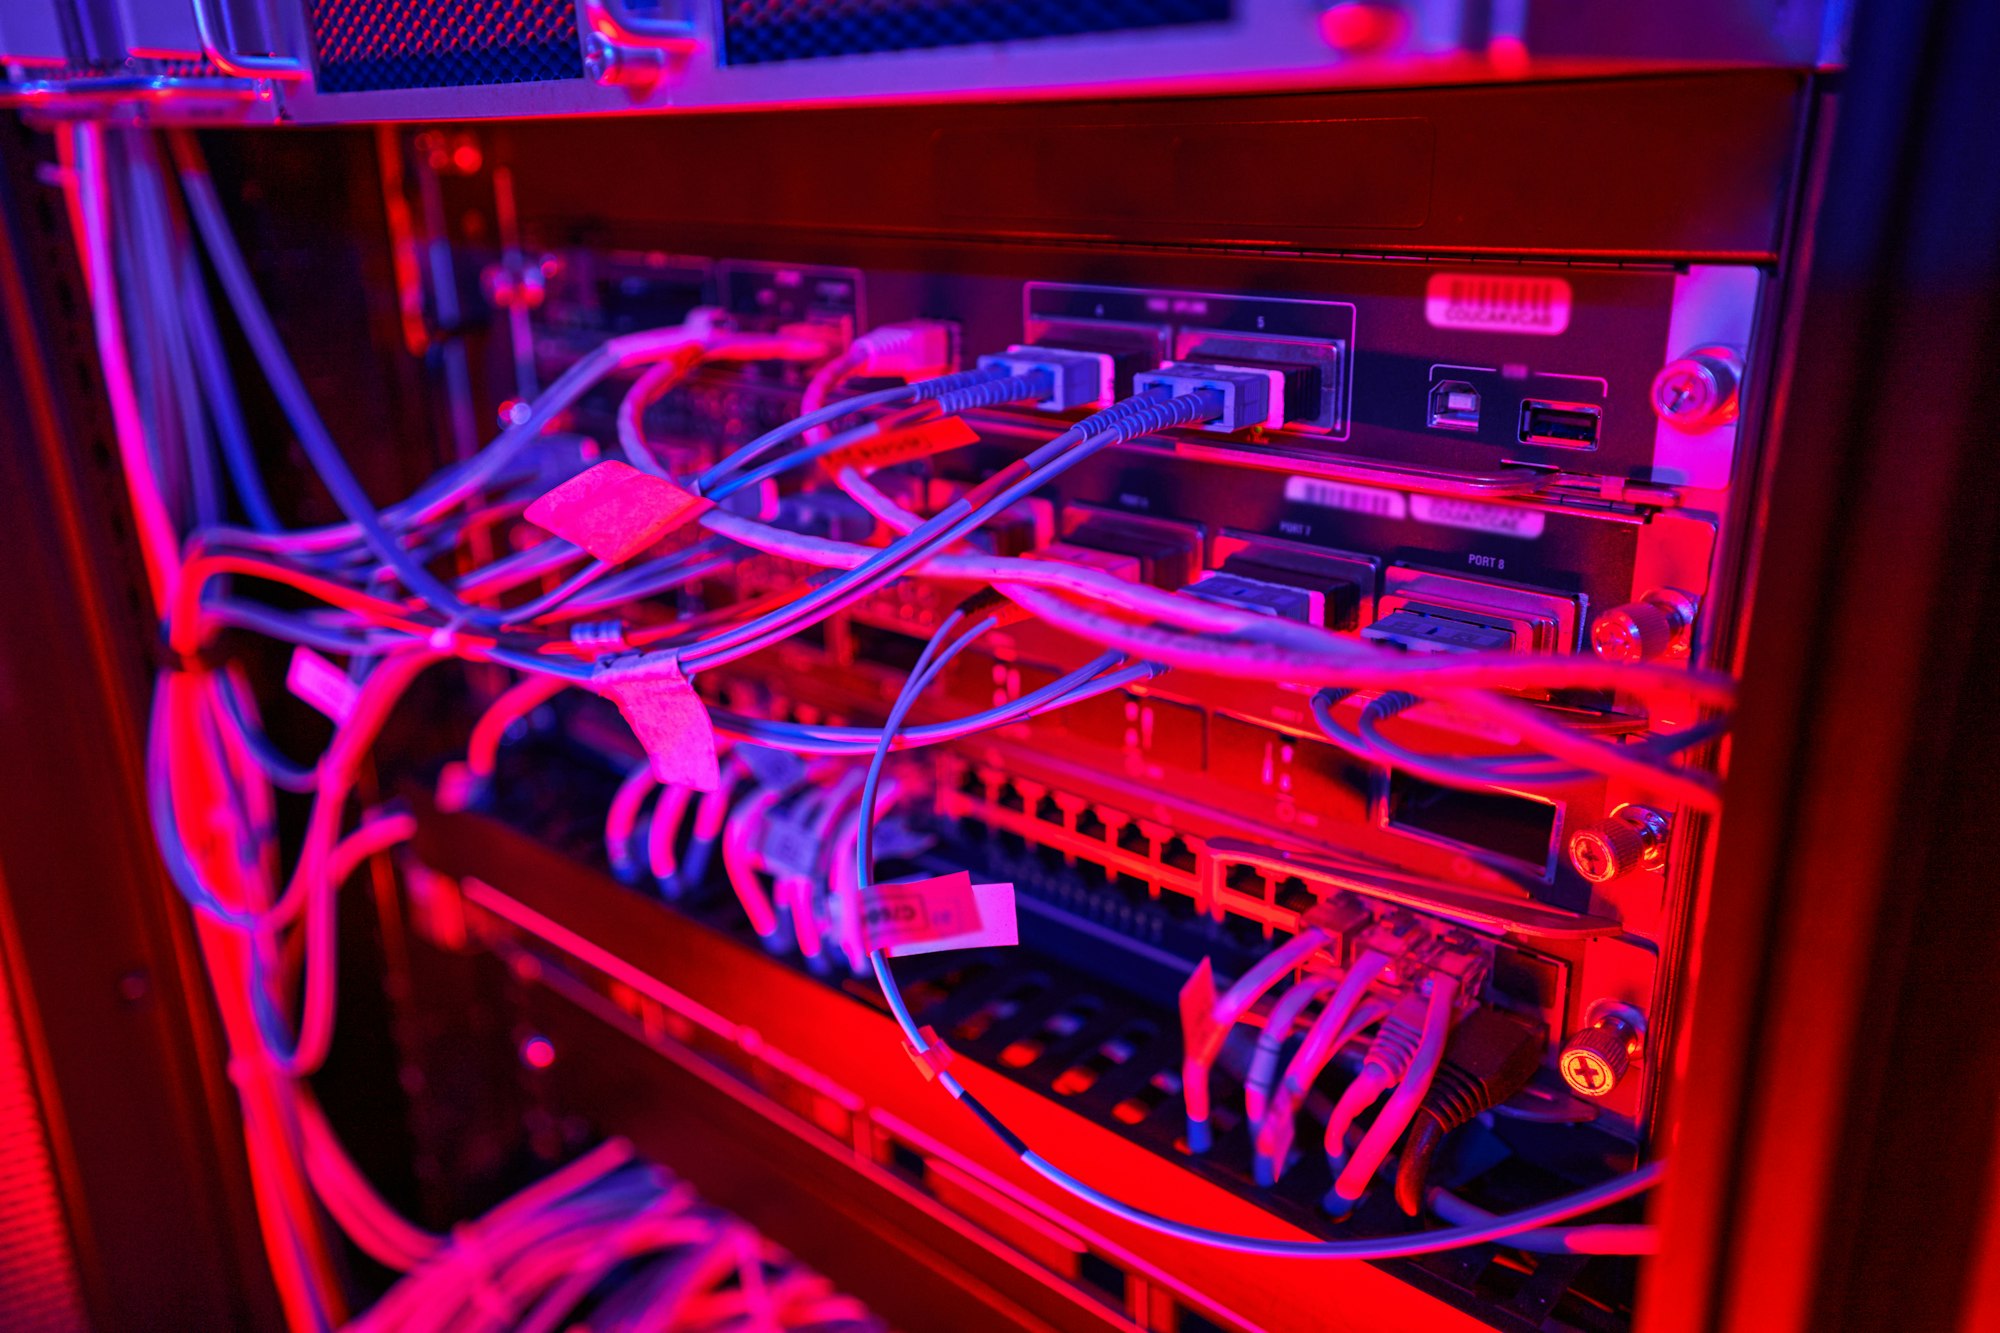 Details shot of patch cord cables connected to patch panel in database center